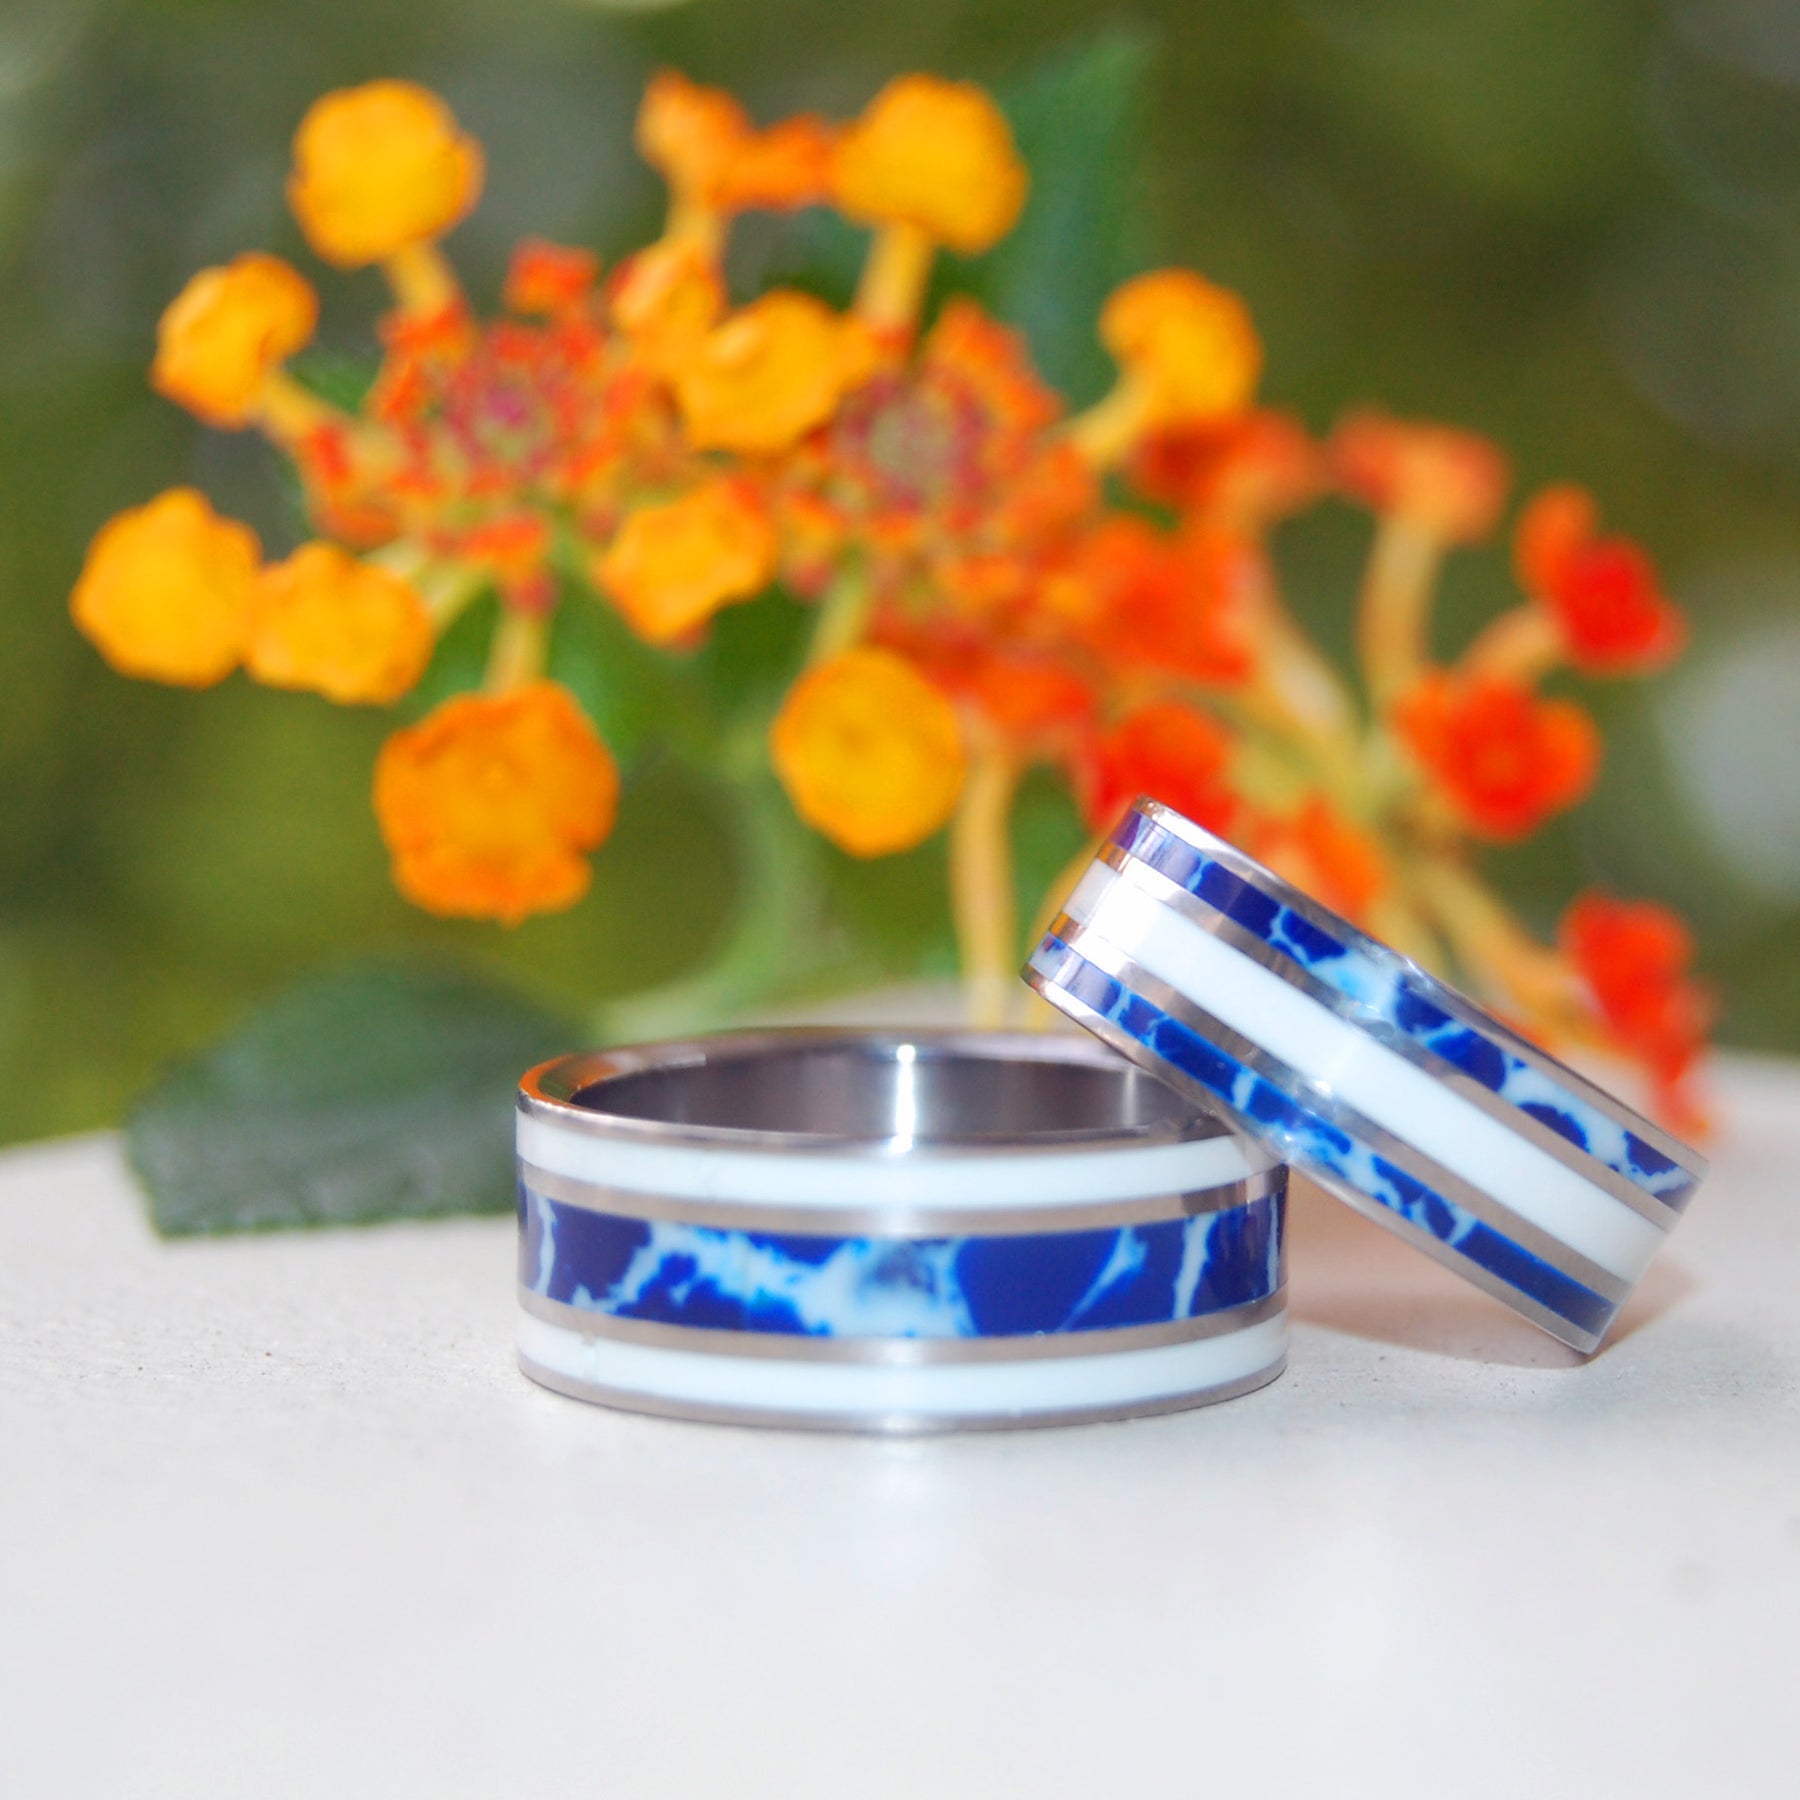 IT'S ALL GREEK TO ME! | Cobalt Stone & White Marble -Greek Wedding - Unique Wedding Rings - Minter and Richter Designs